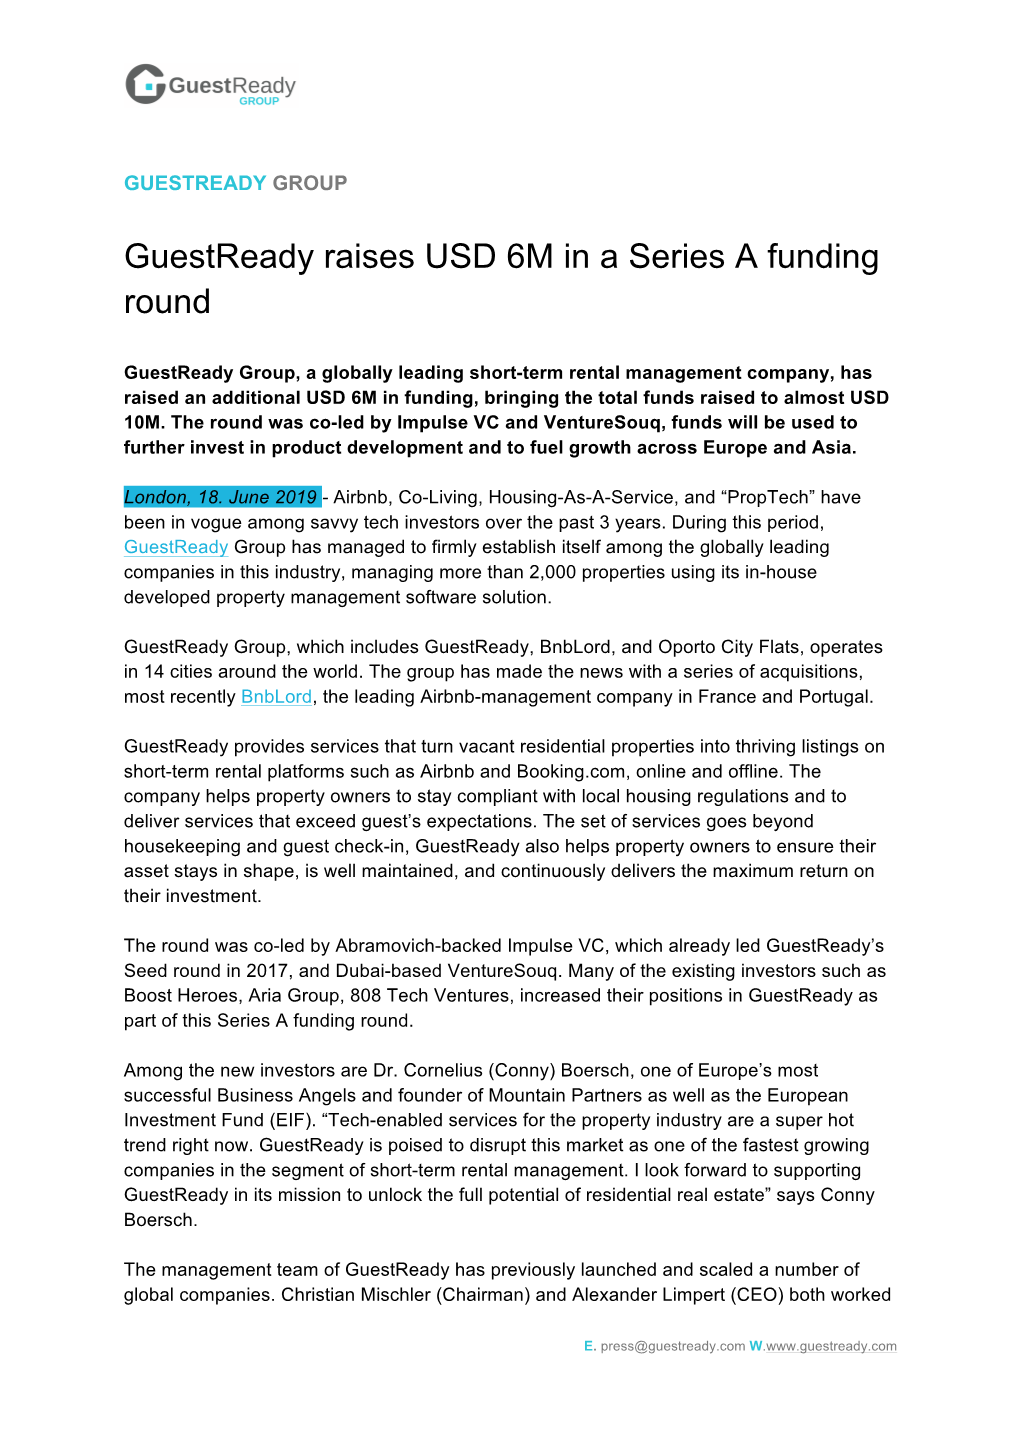 Guestready Raises USD 6M in a Series a Funding Round